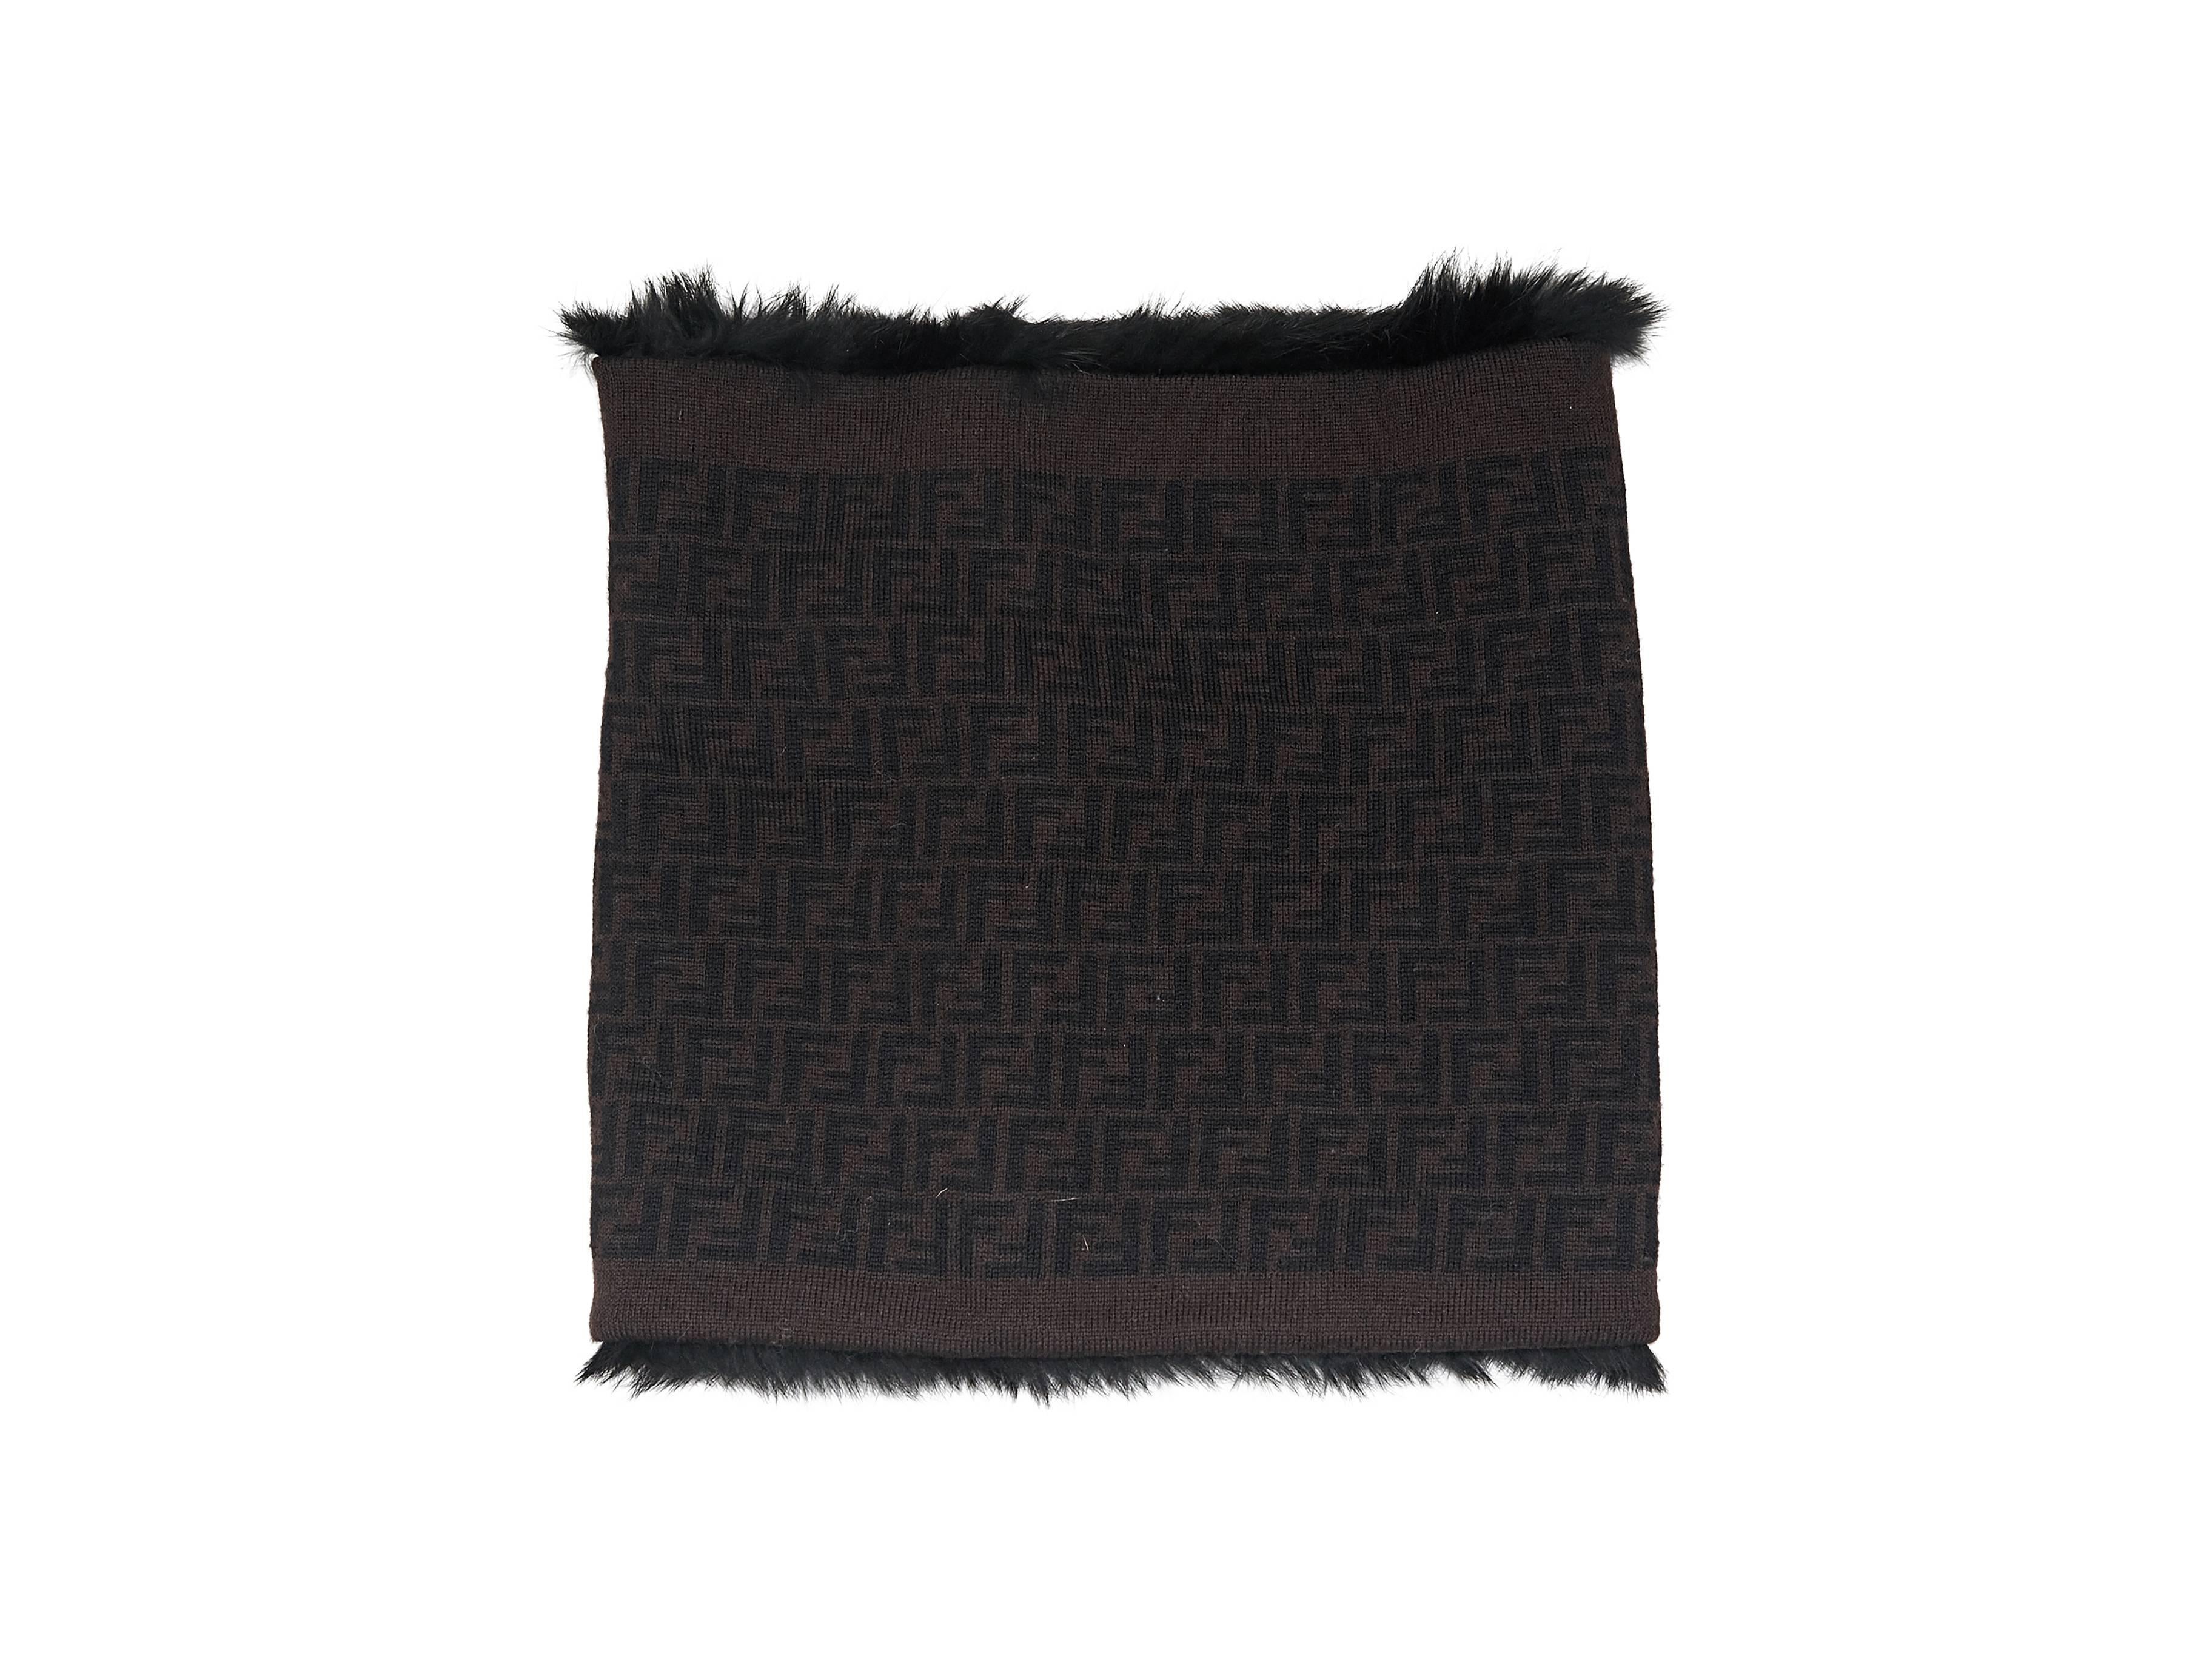 Product details: Black infinity scarf by Fendi. Detailed with Zucca logo. Fur lining. 
Condition: Excellent. 
Est. Retail $ 1,300.00